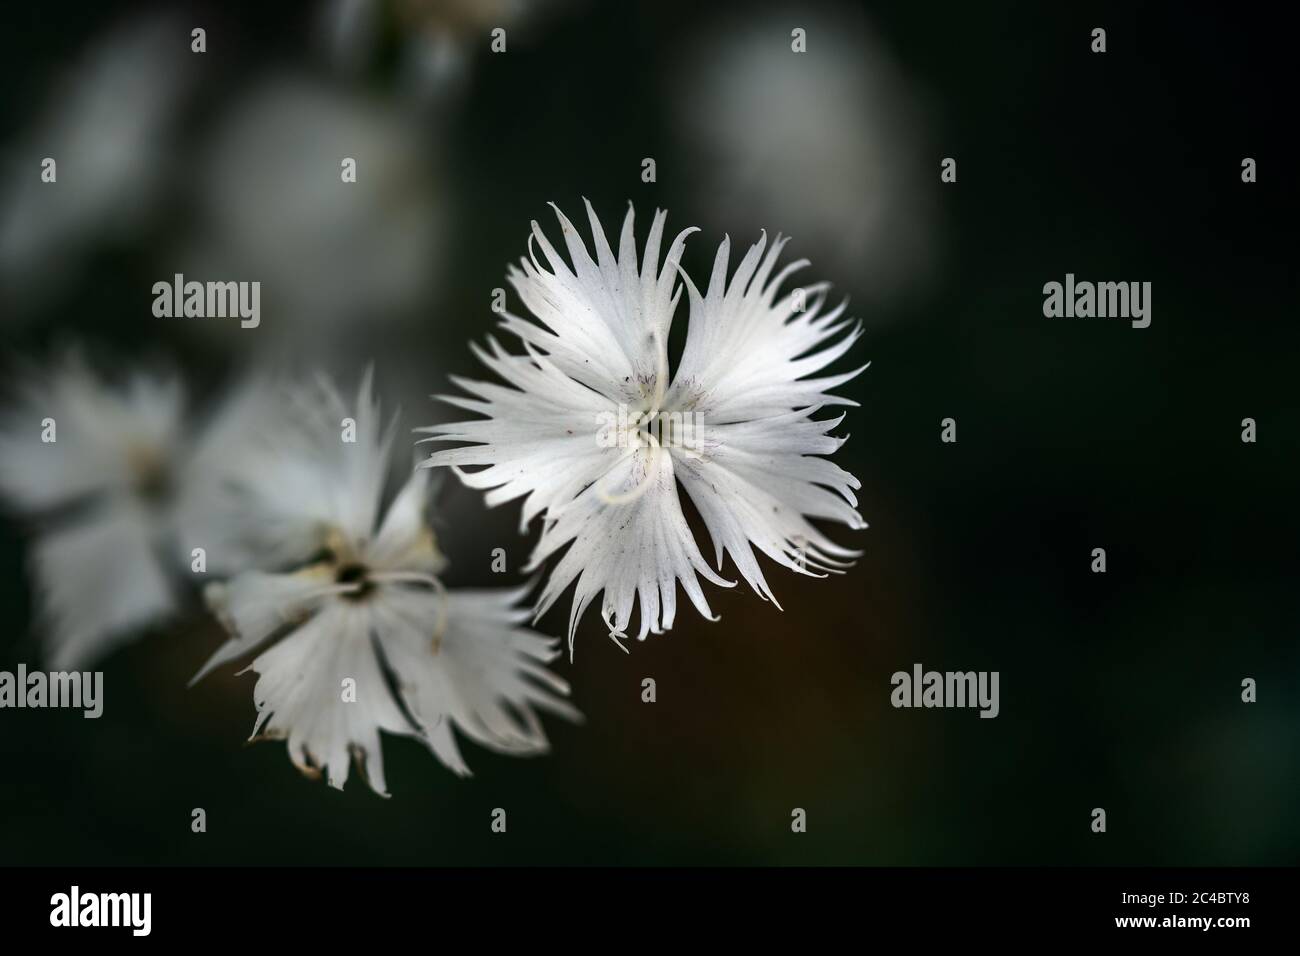 White flower of Dianthus arenarius against a dark background with copy space, close-up, selected focus, very narrow depth of field Stock Photo